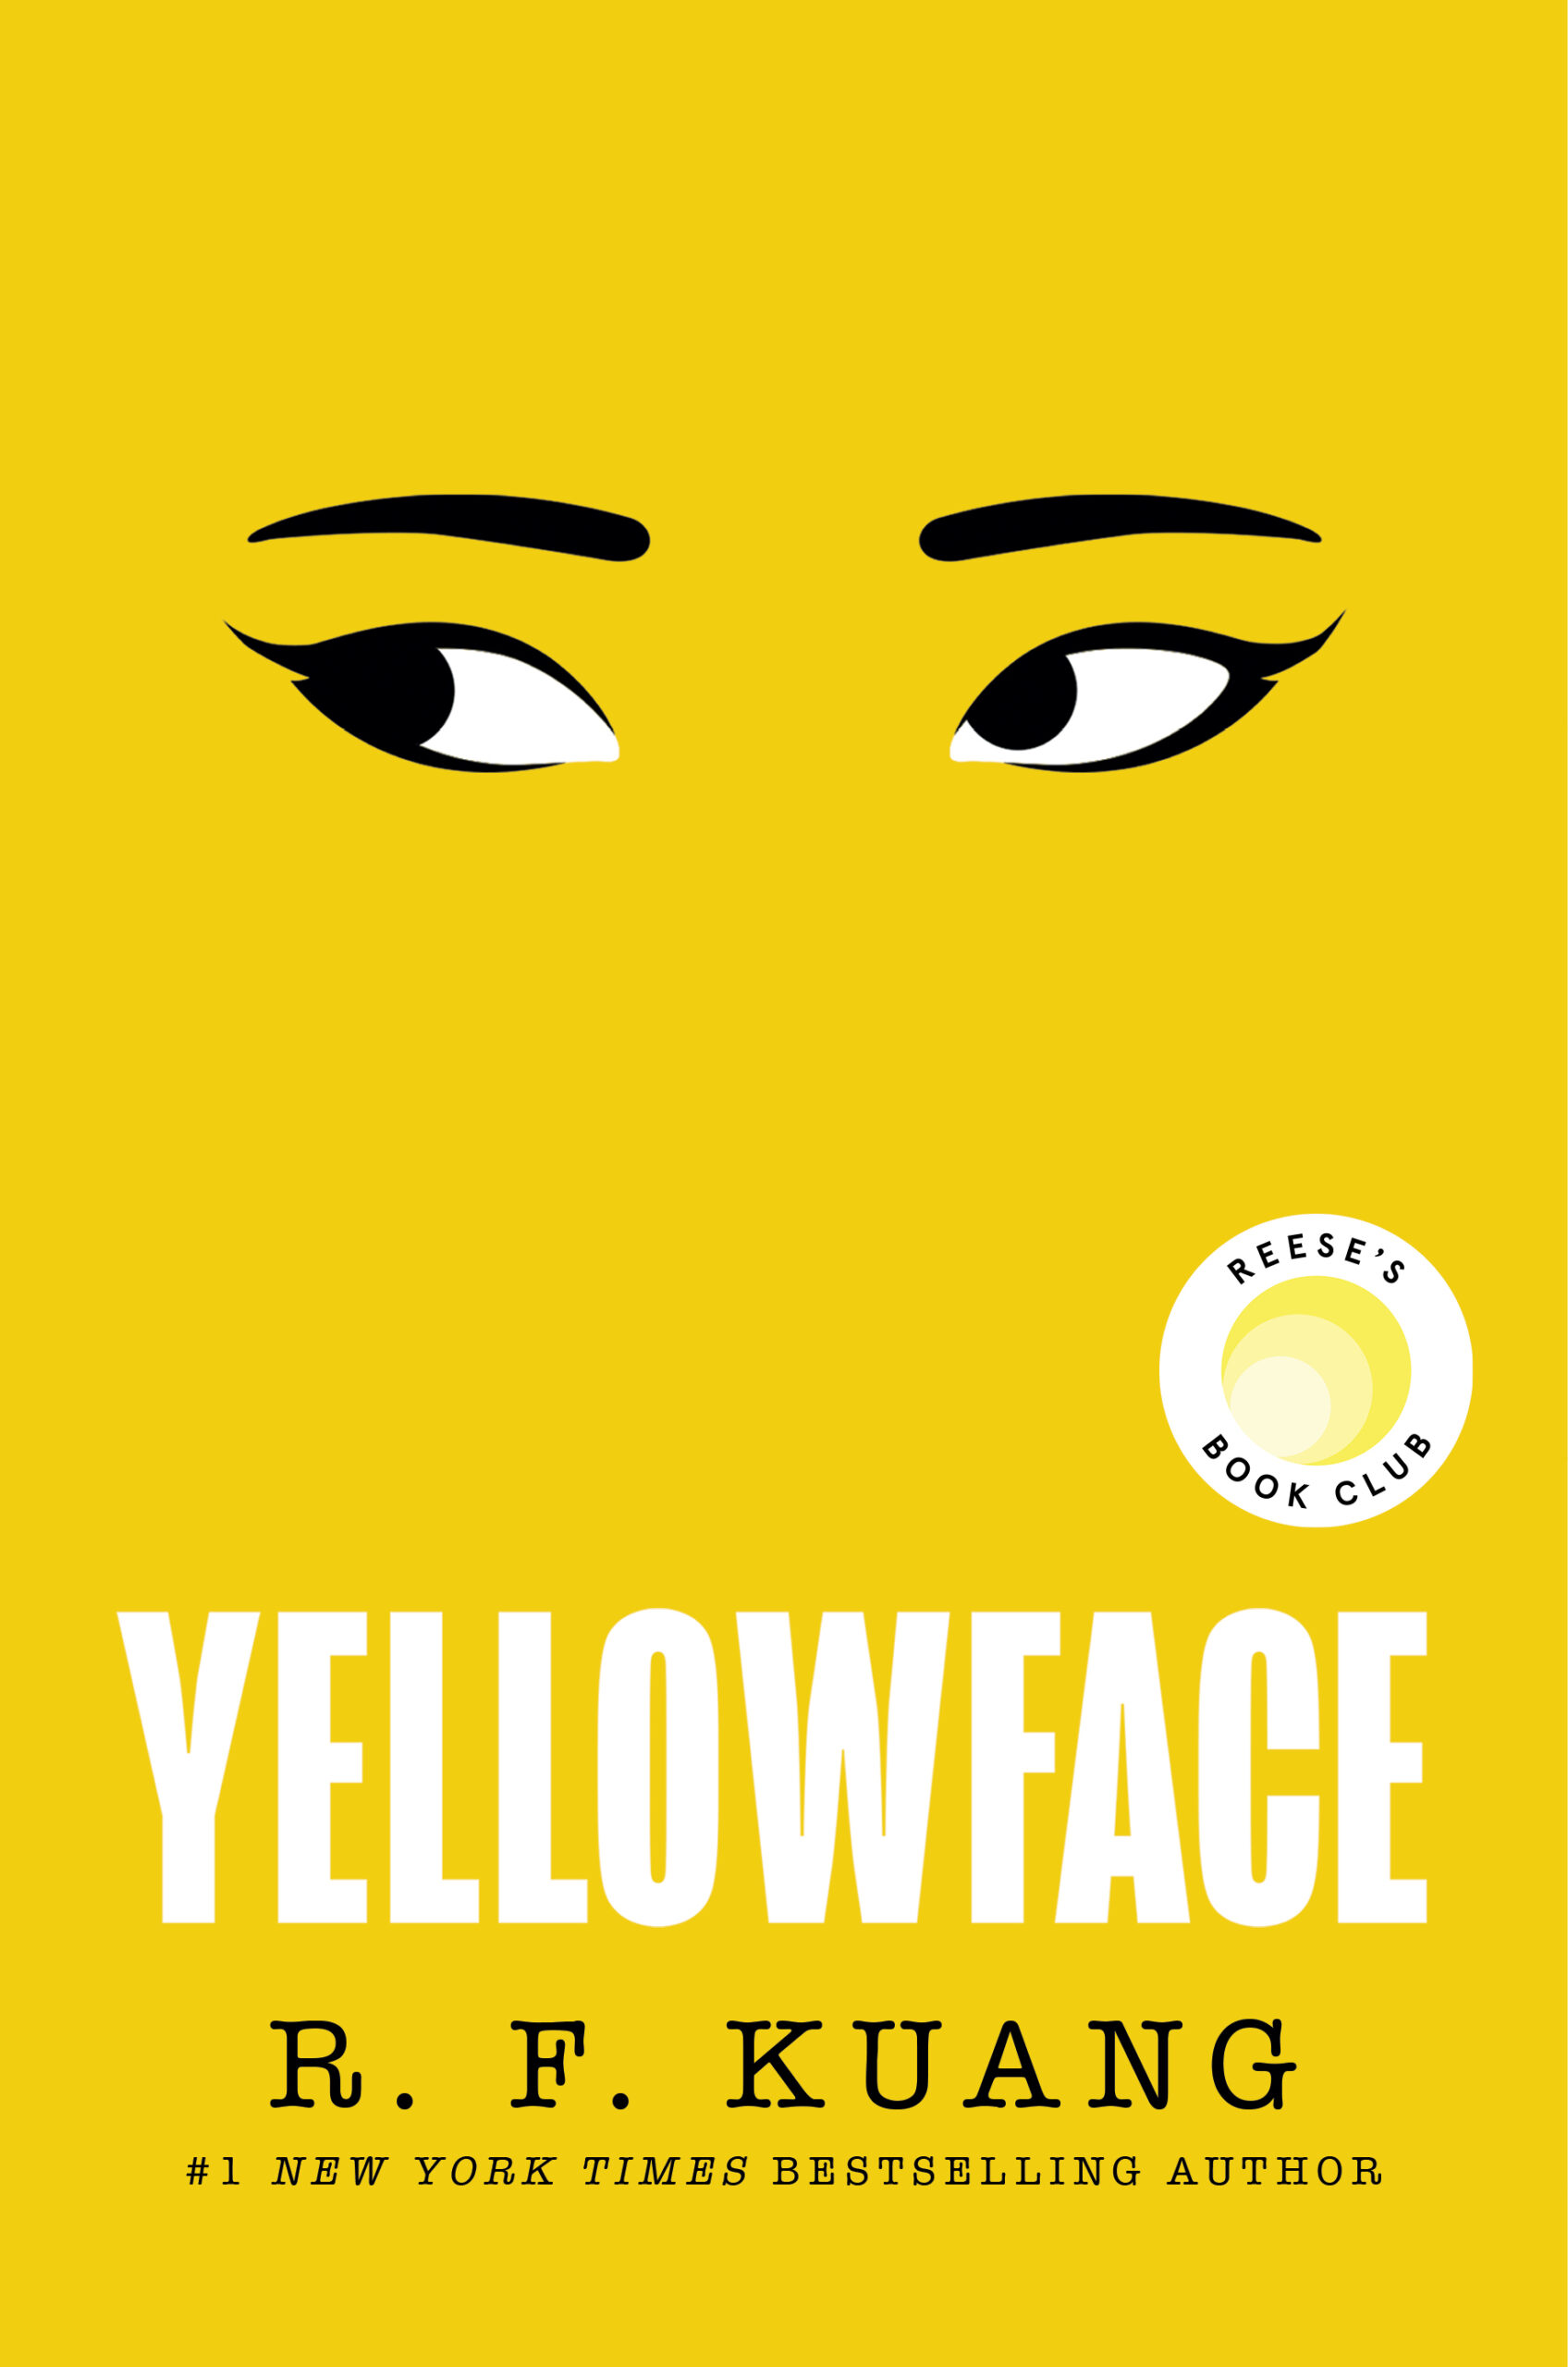 One of our recommended books is Yellowface by R.F. Kuang